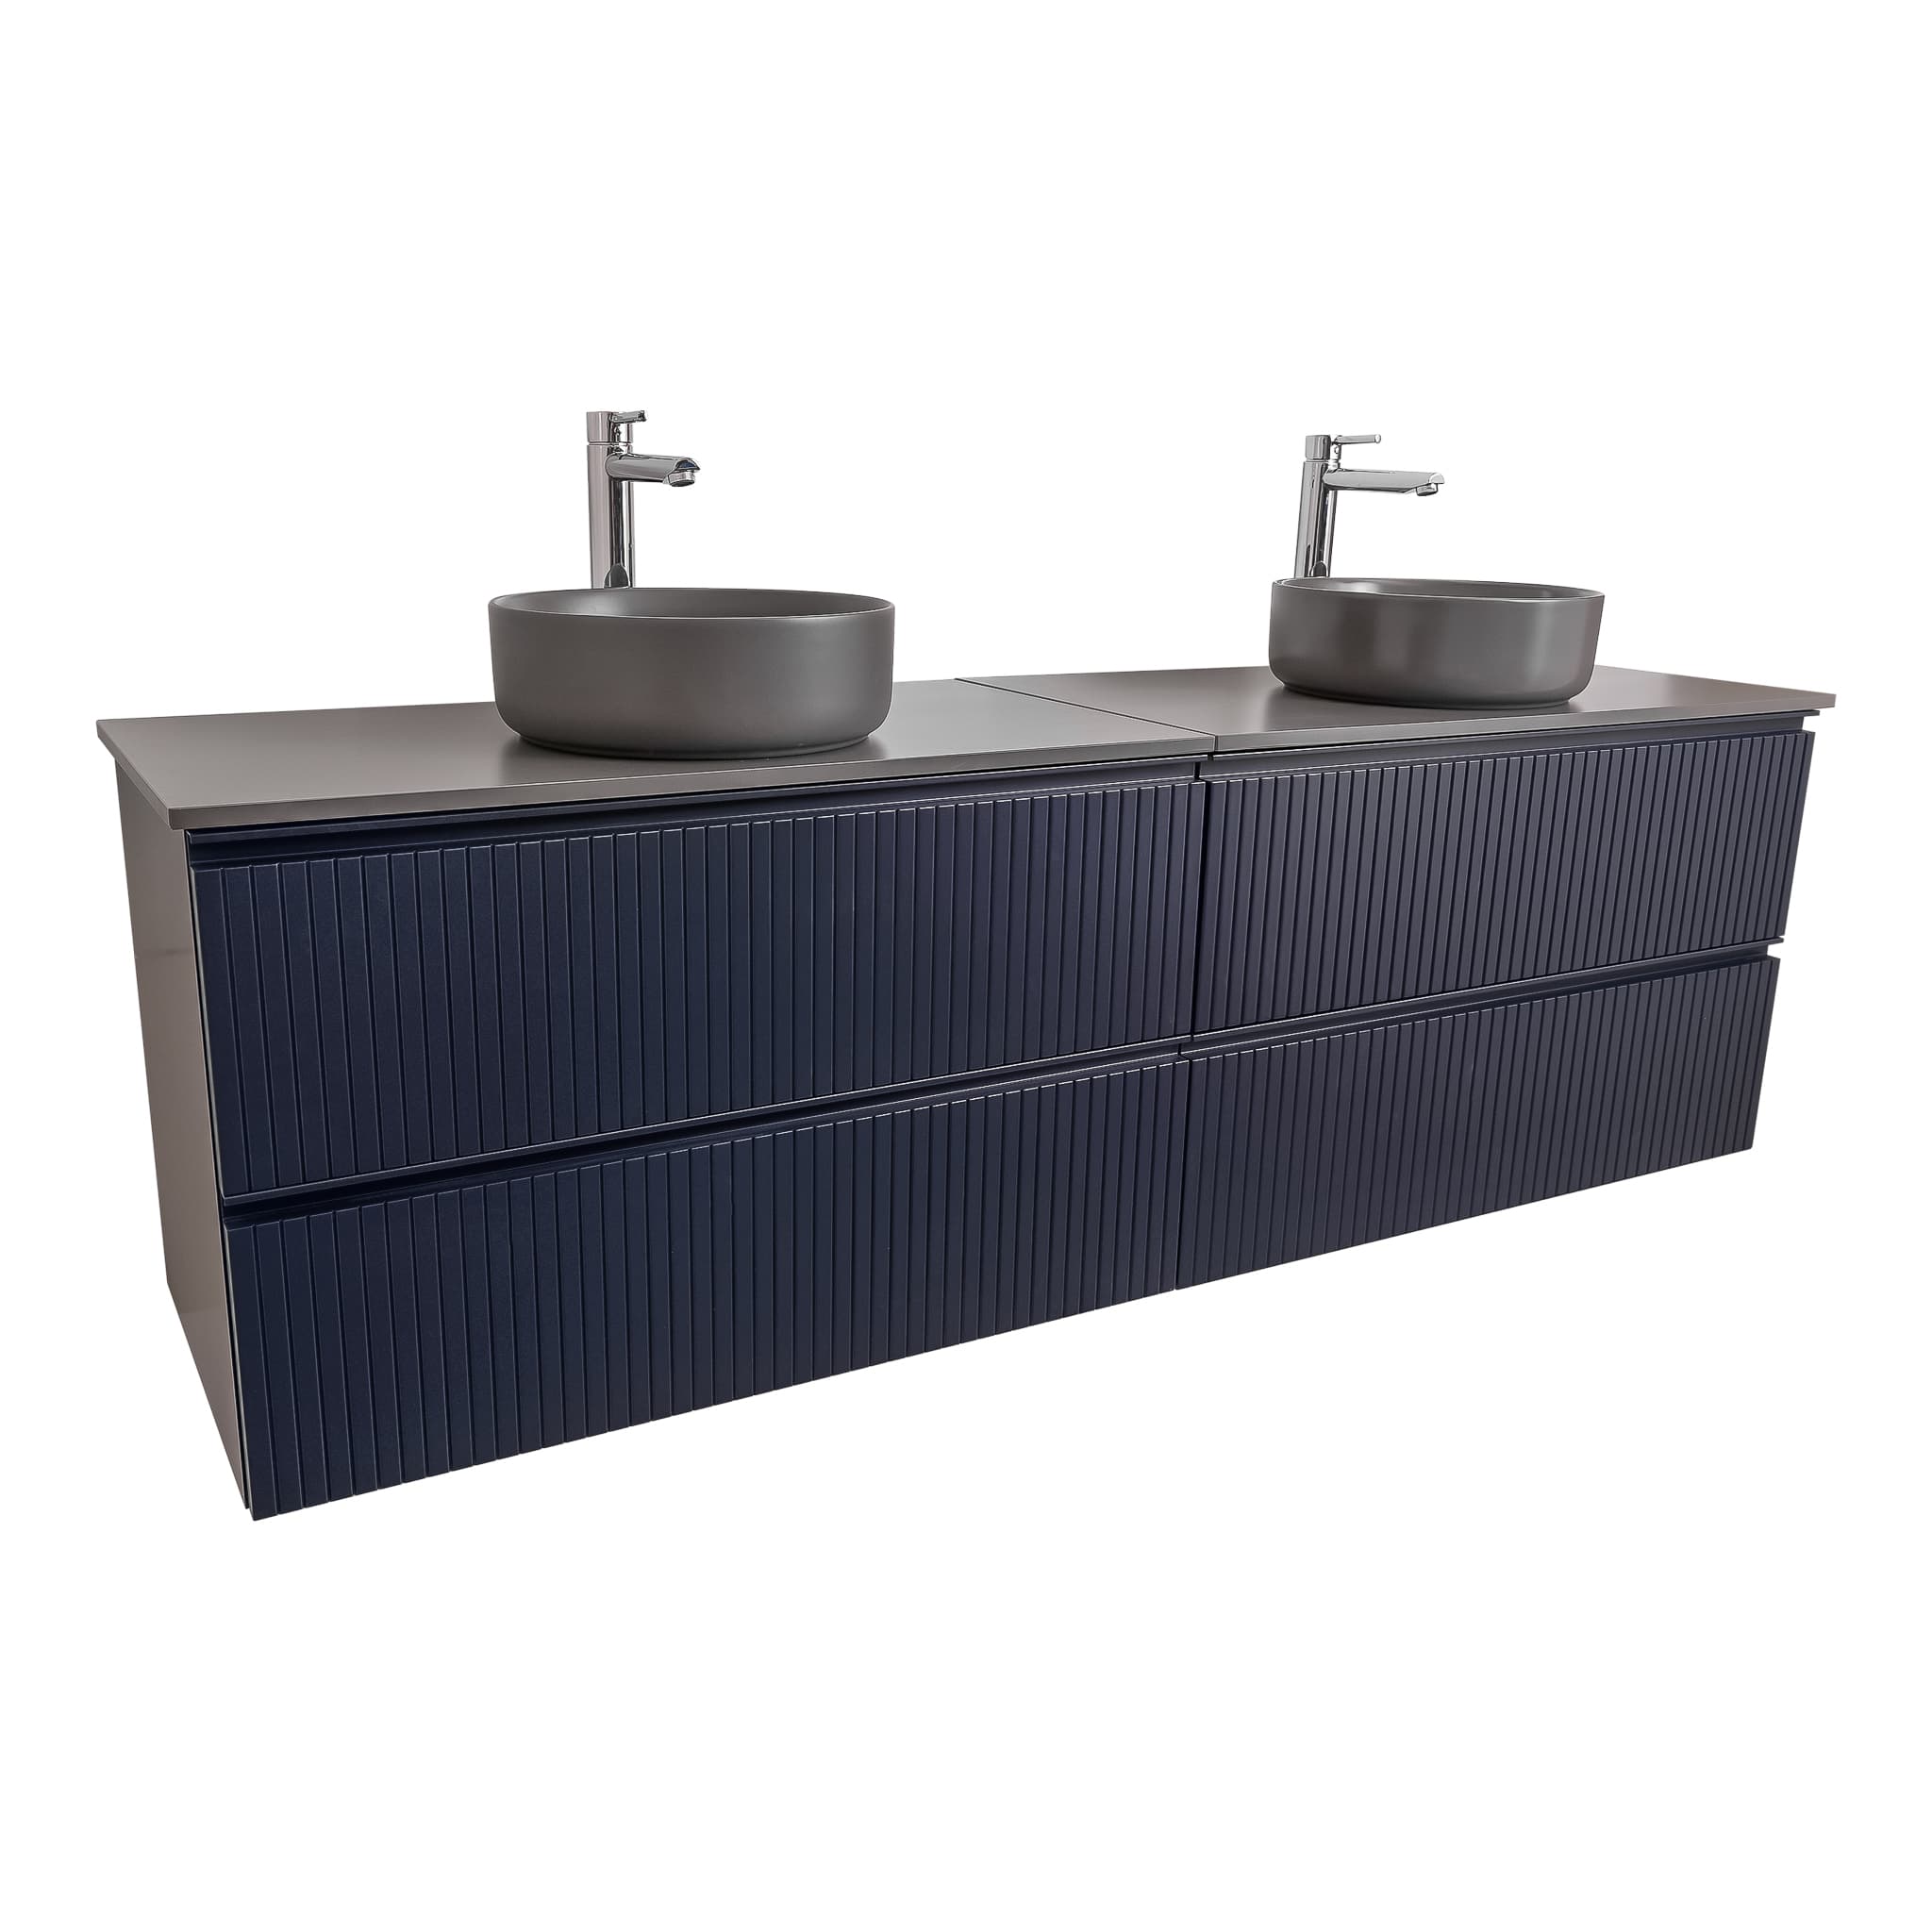 Ares 72 Matte Navy Blue Cabinet, Ares Grey Ceniza Top And Two Ares Grey Ceniza Ceramic Basin, Wall Mounted Modern Vanity Set